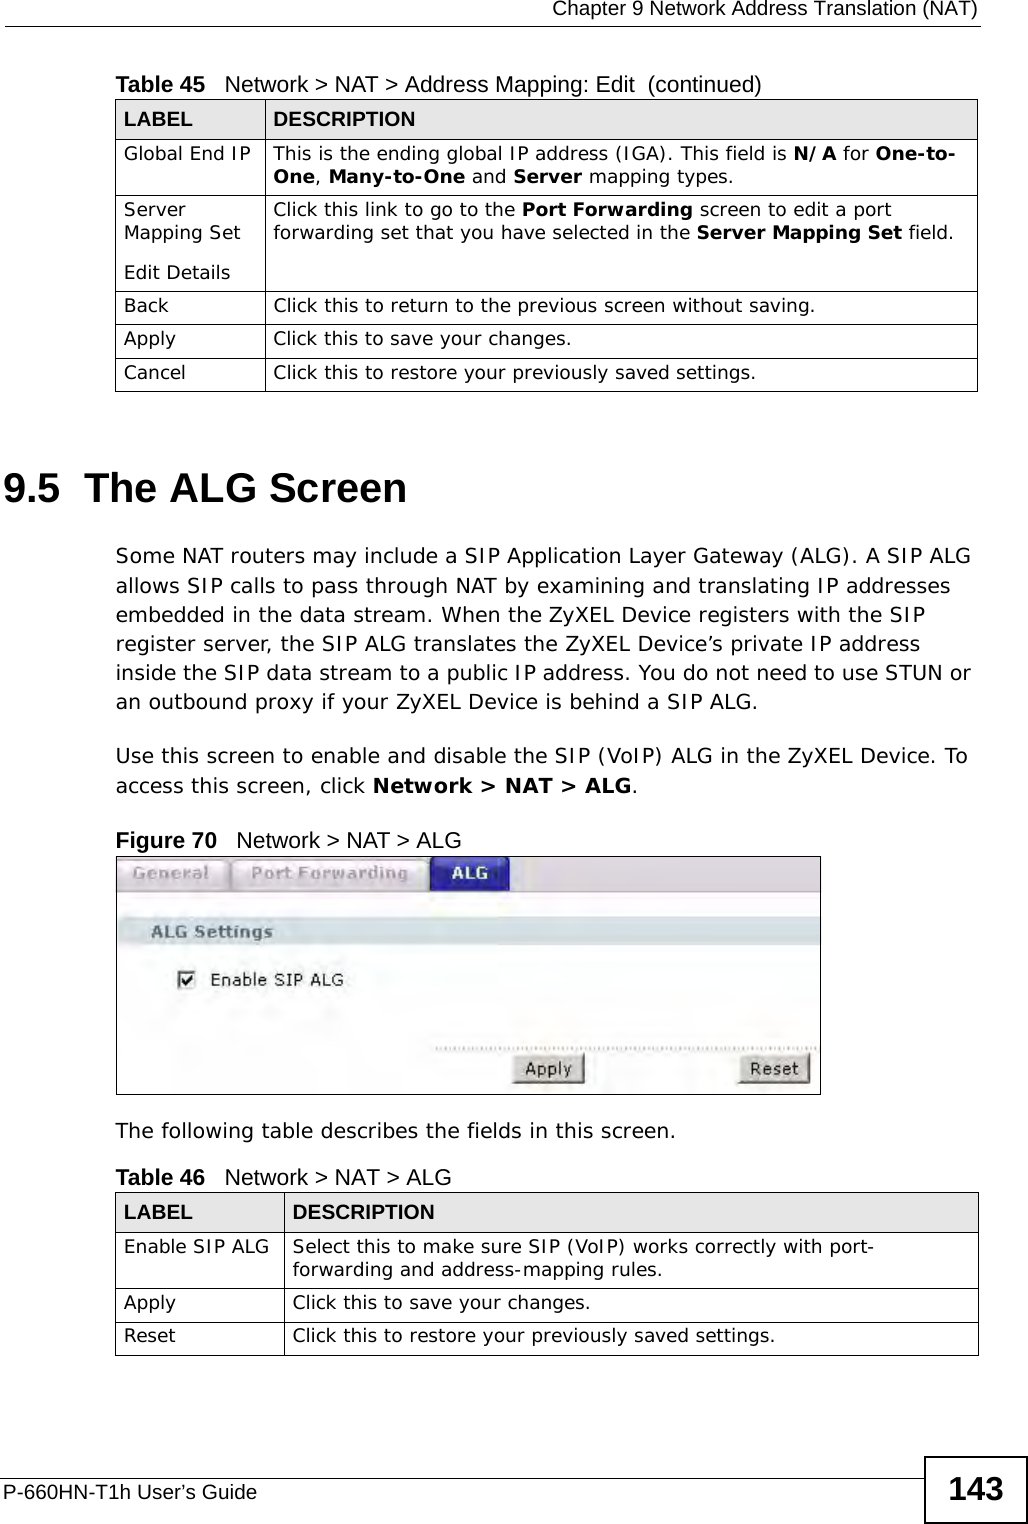  Chapter 9 Network Address Translation (NAT)P-660HN-T1h User’s Guide 1439.5  The ALG ScreenSome NAT routers may include a SIP Application Layer Gateway (ALG). A SIP ALG allows SIP calls to pass through NAT by examining and translating IP addresses embedded in the data stream. When the ZyXEL Device registers with the SIP register server, the SIP ALG translates the ZyXEL Device’s private IP address inside the SIP data stream to a public IP address. You do not need to use STUN or an outbound proxy if your ZyXEL Device is behind a SIP ALG.Use this screen to enable and disable the SIP (VoIP) ALG in the ZyXEL Device. To access this screen, click Network &gt; NAT &gt; ALG.Figure 70   Network &gt; NAT &gt; ALGThe following table describes the fields in this screen.Global End IP This is the ending global IP address (IGA). This field is N/A for One-to-One, Many-to-One and Server mapping types.Server Mapping SetEdit DetailsClick this link to go to the Port Forwarding screen to edit a port forwarding set that you have selected in the Server Mapping Set field.Back Click this to return to the previous screen without saving.Apply Click this to save your changes.Cancel Click this to restore your previously saved settings.Table 45   Network &gt; NAT &gt; Address Mapping: Edit  (continued)LABEL DESCRIPTIONTable 46   Network &gt; NAT &gt; ALGLABEL DESCRIPTIONEnable SIP ALG Select this to make sure SIP (VoIP) works correctly with port-forwarding and address-mapping rules.Apply Click this to save your changes.Reset Click this to restore your previously saved settings.